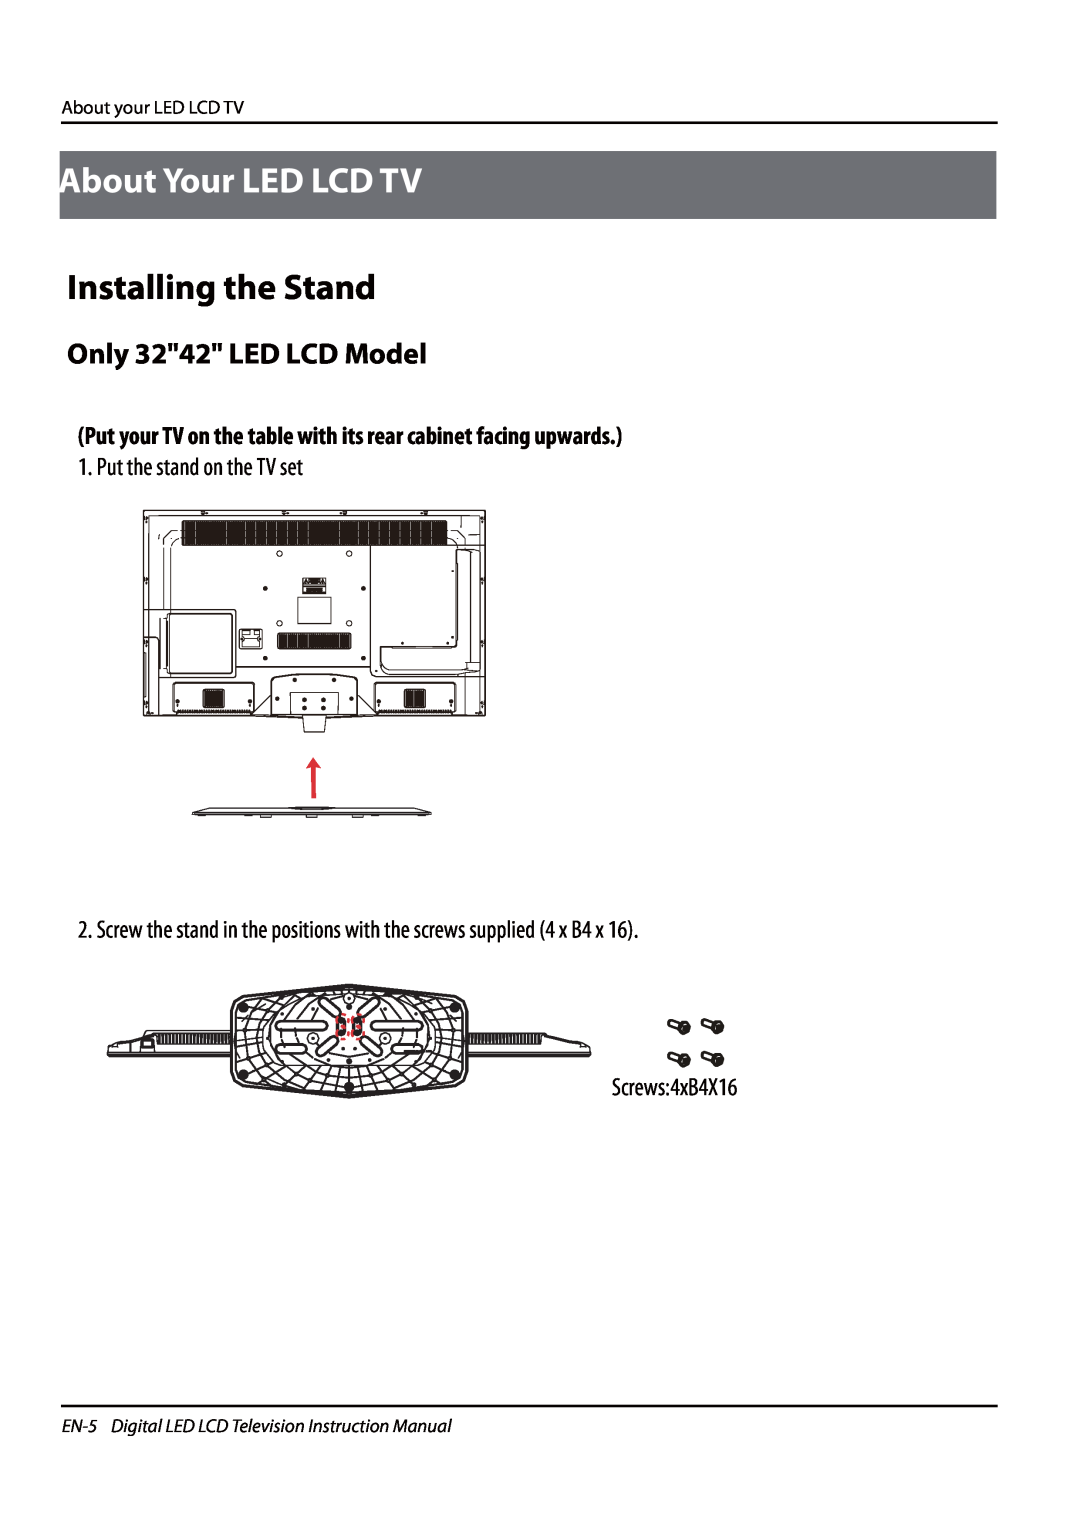 Haier LET32T1000HF About Your LED LCD TV, Installing the Stand, Only 3242 LED LCD Model, Put the stand on the TV set 